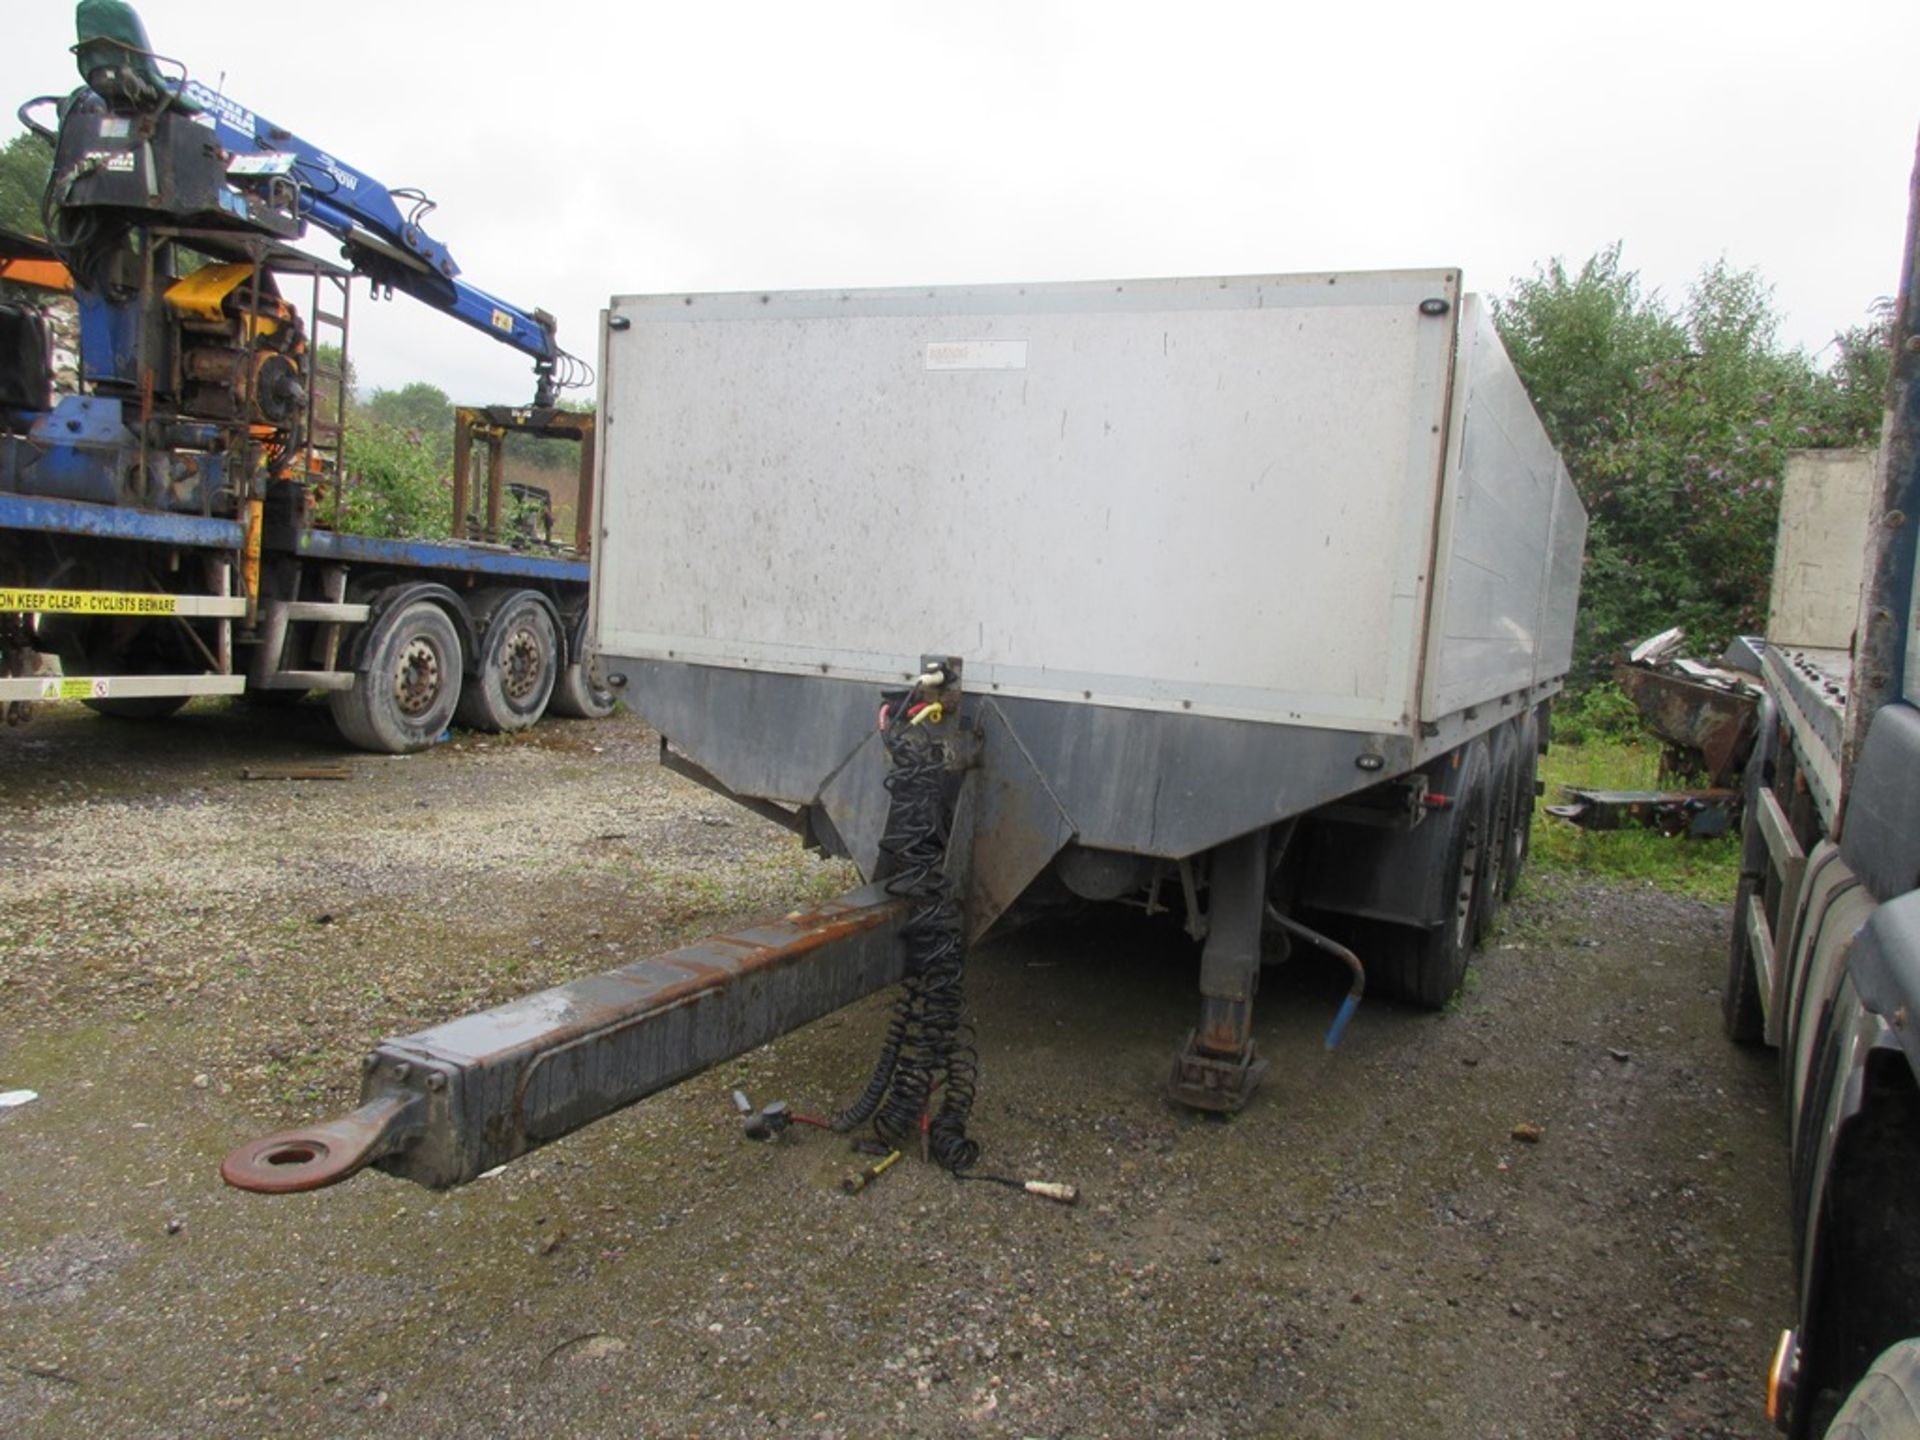 Abel tri-axle draw bar drop side flat bed trailer, model DB24CCA3R, serial no 3144.04 (2008) - bed - Image 2 of 10